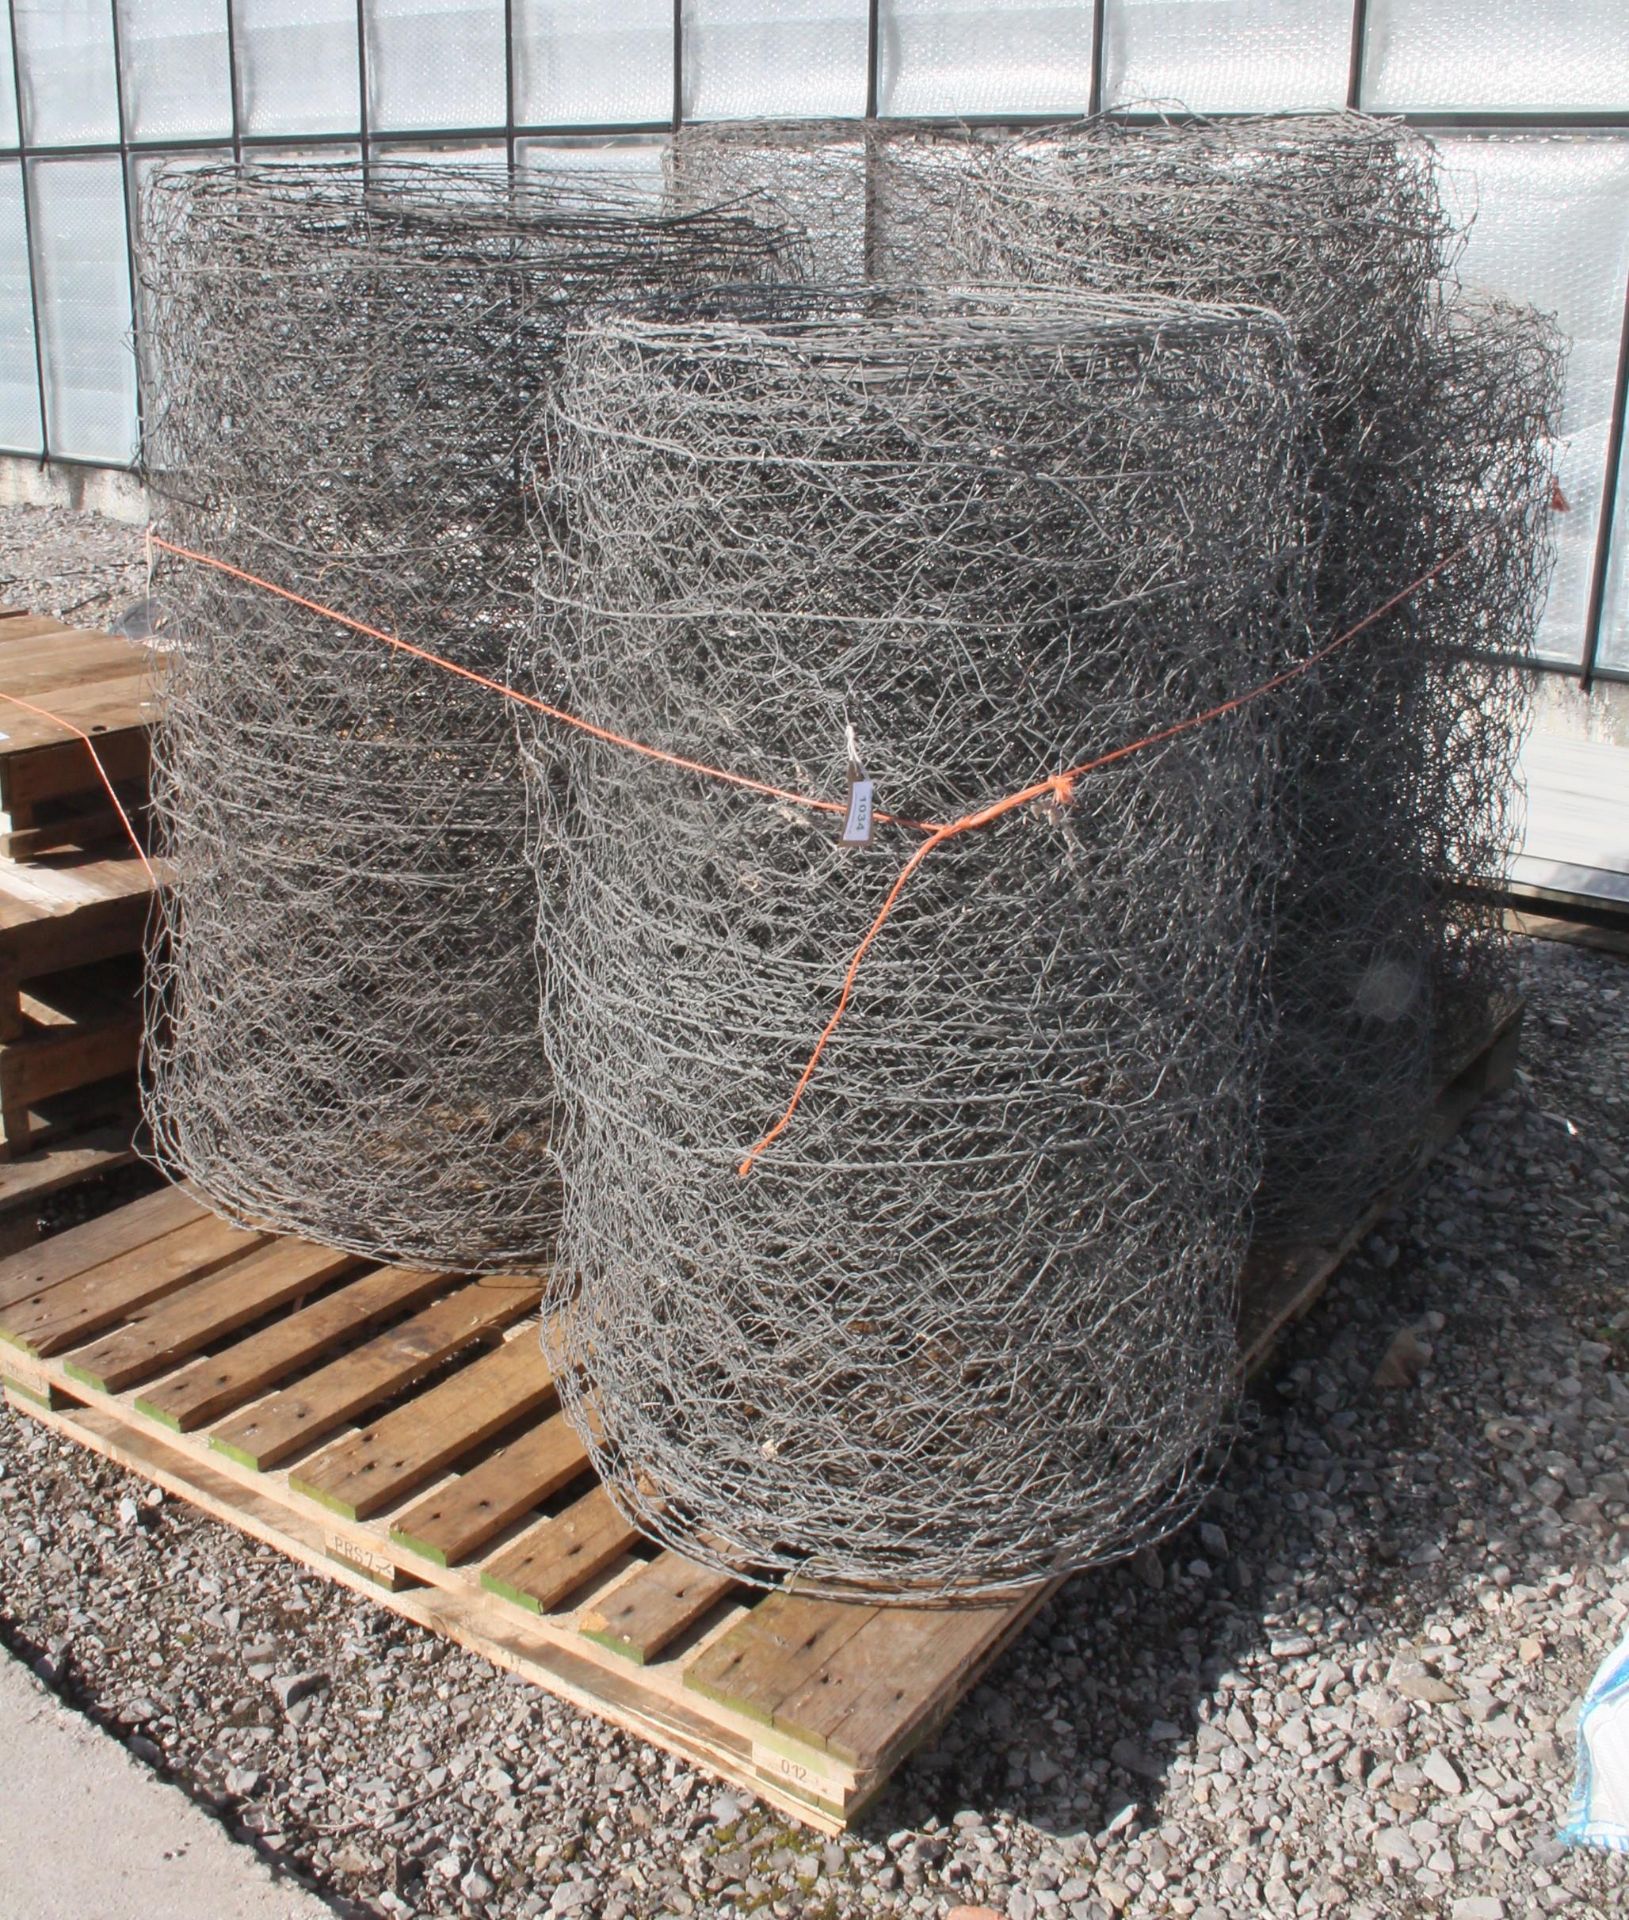 2 ROLLS OF WIRE NETTING 4 'WIDE X 4", 2 ROLLS 3' 6" WIDE X 4" AND 1 ROLL 4' 6" WIDE X 2" NO VAT